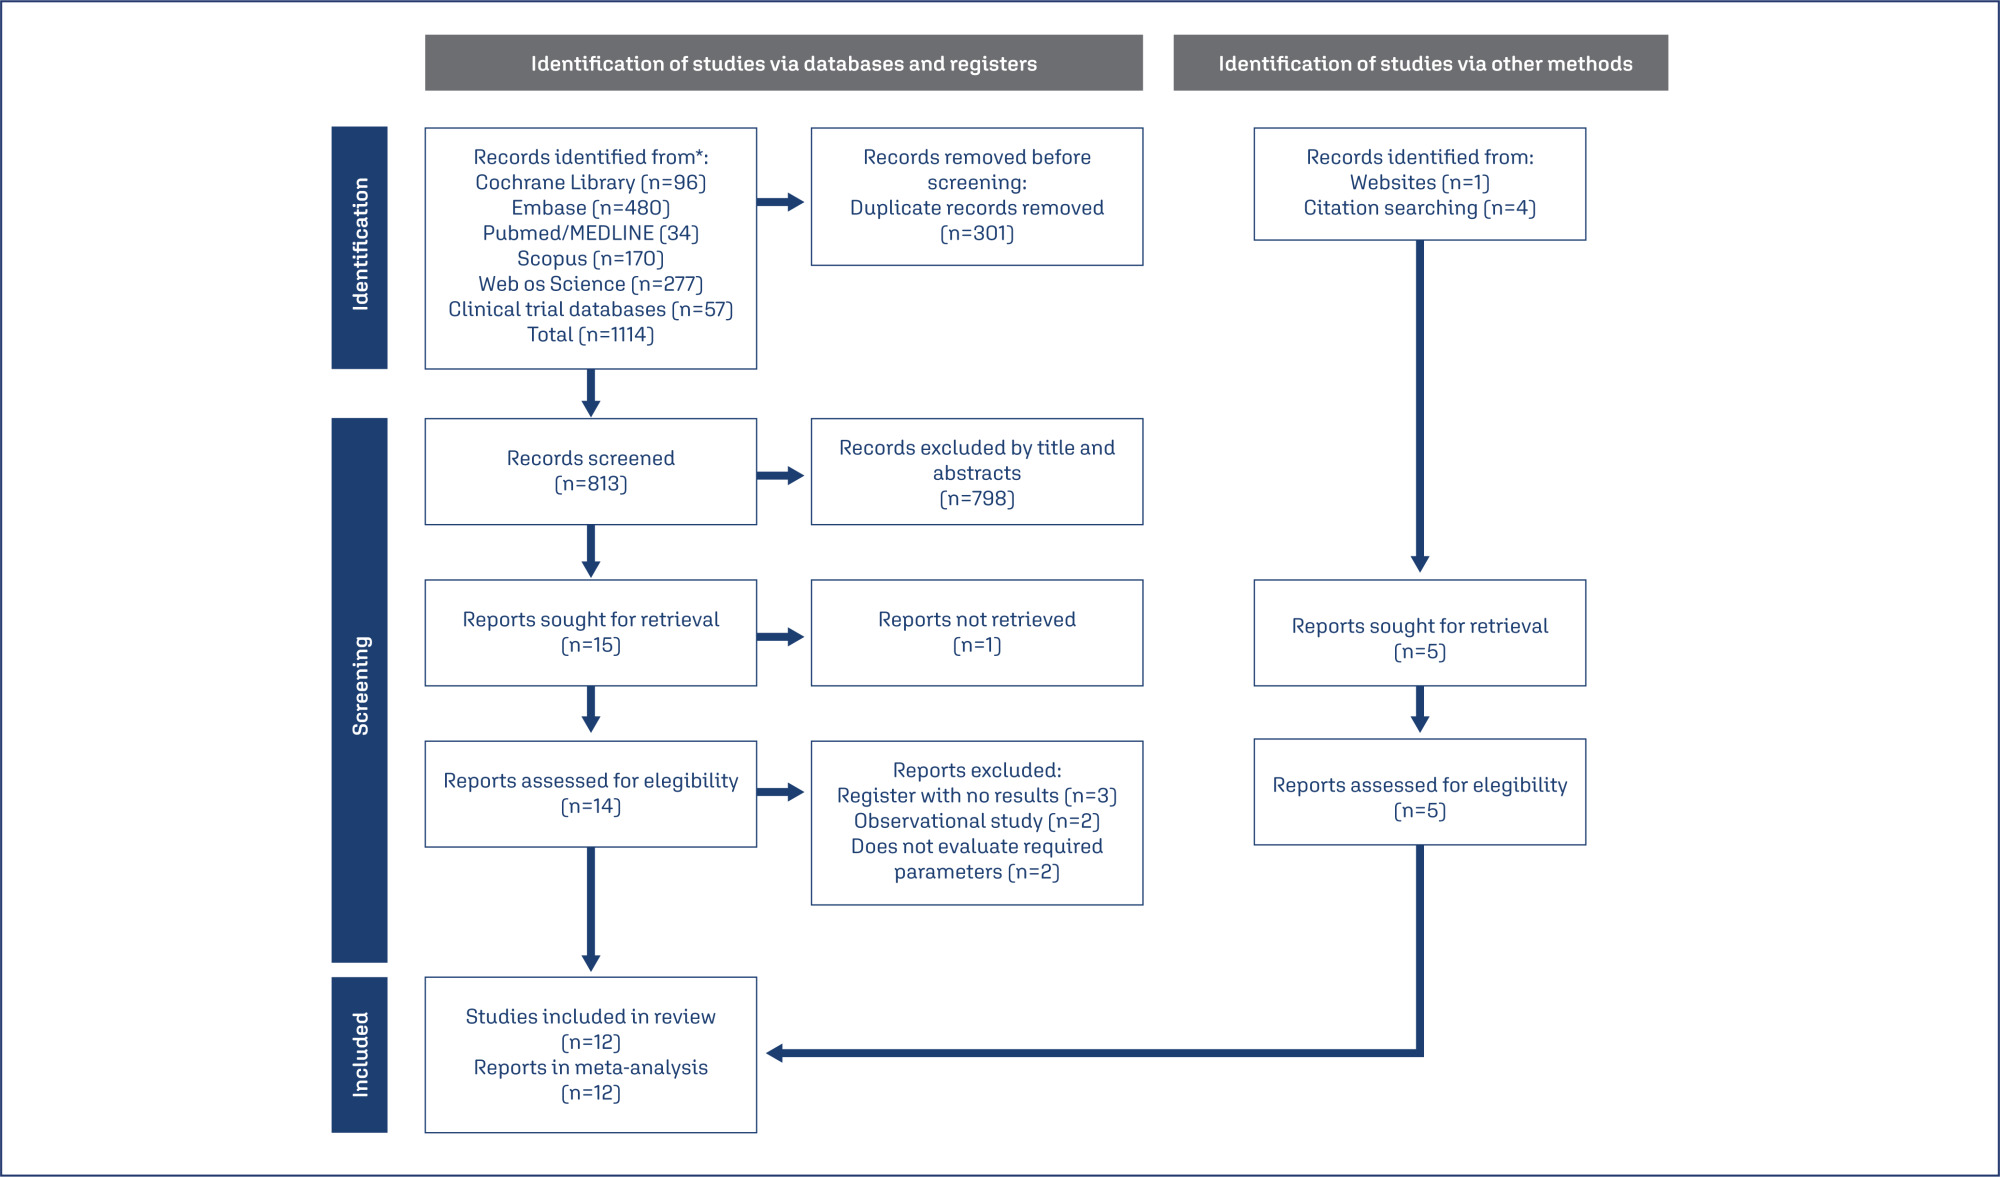 Laser therapy for genitourinary syndrome of menopause: systematic review and meta-analysis of randomized controlled trial